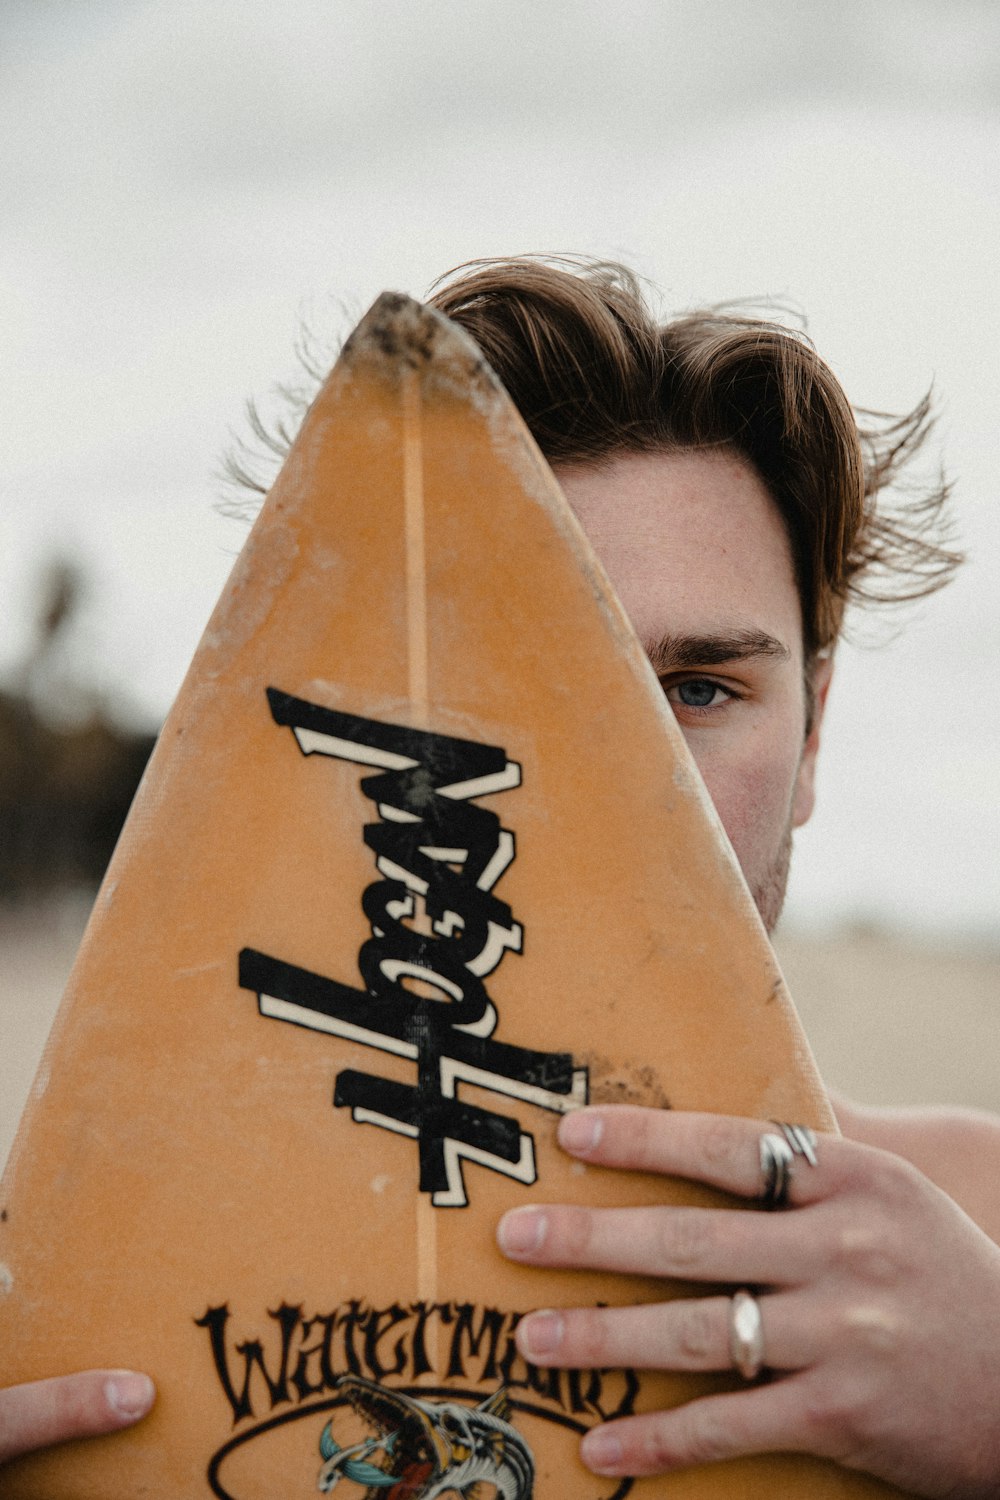 person holding brown and black surfboard